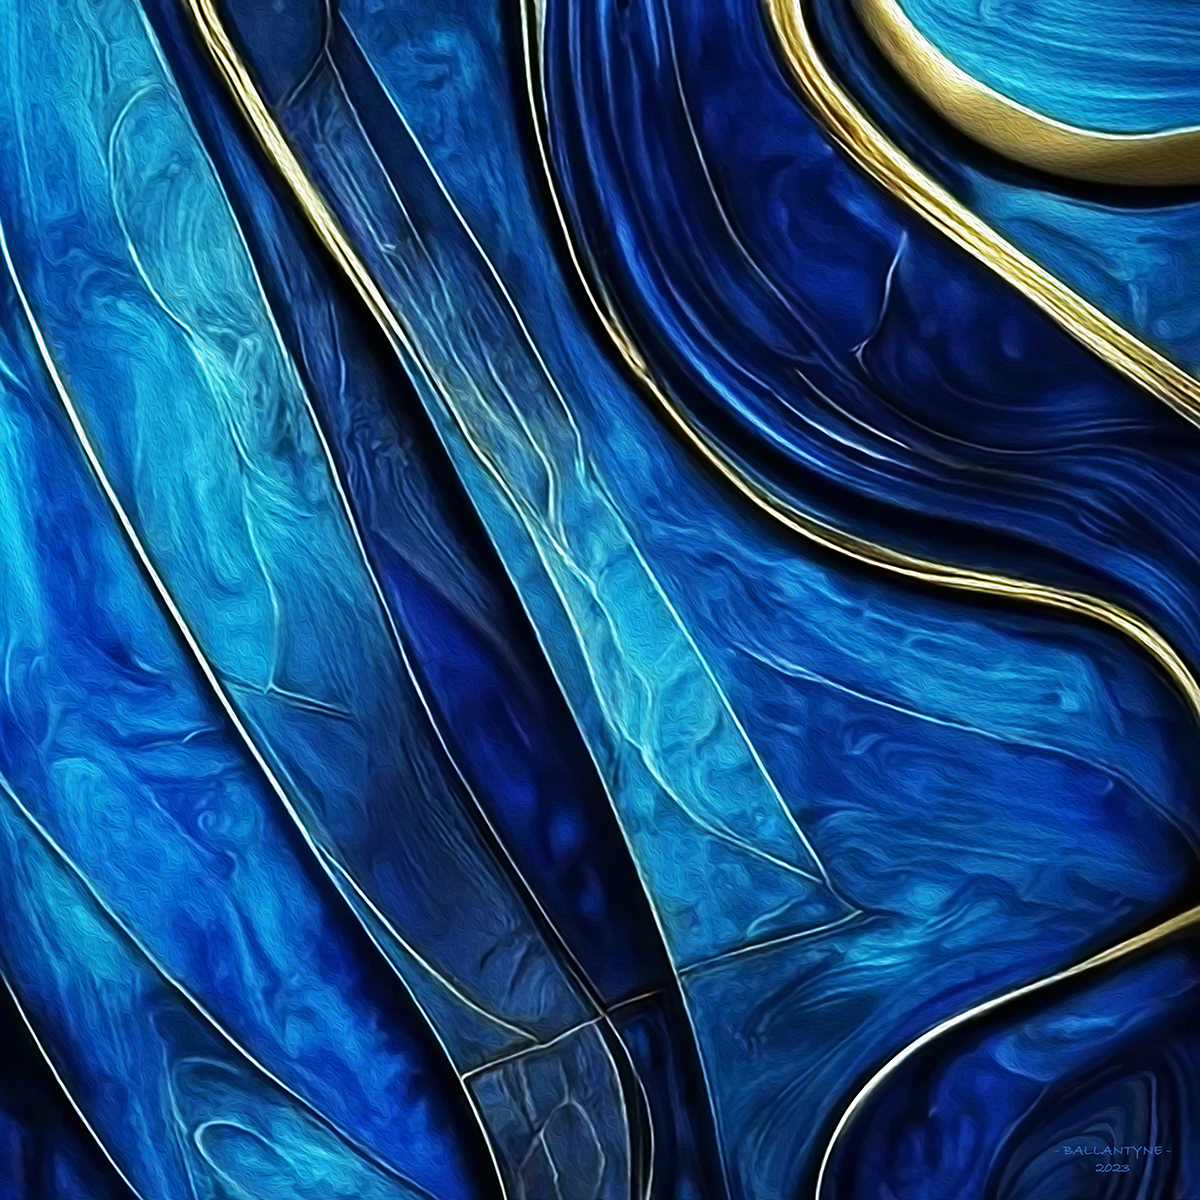 Abstract blue, gold design for pillows, cushions, covers, mugs, greeting cards, tote bags, jigsaw